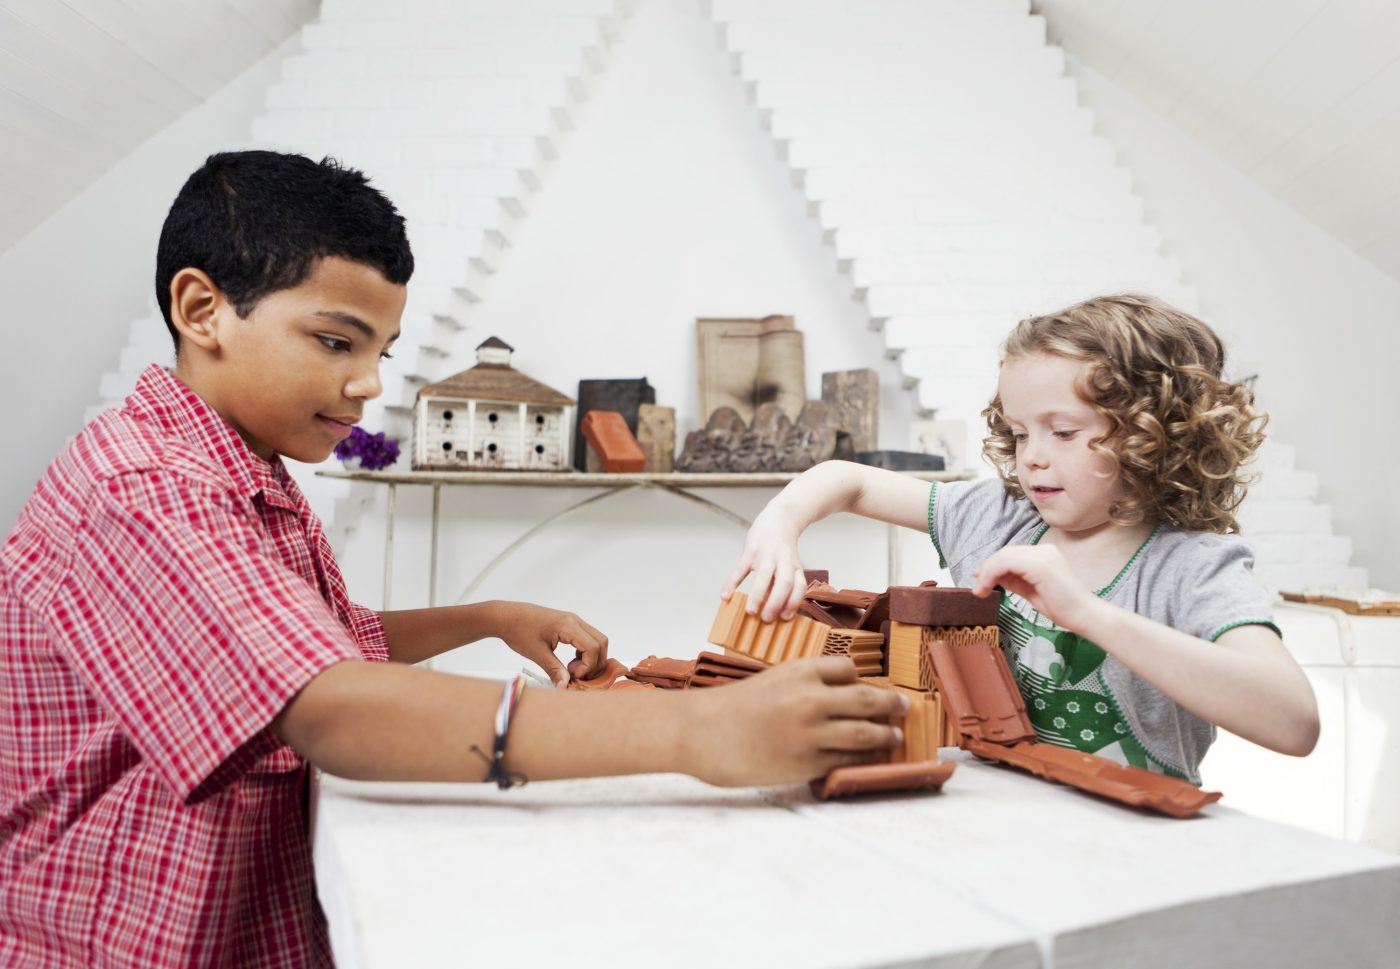 Boy and girl playing with miniature bricks, clay blocks and clay roof tiles in attic loft